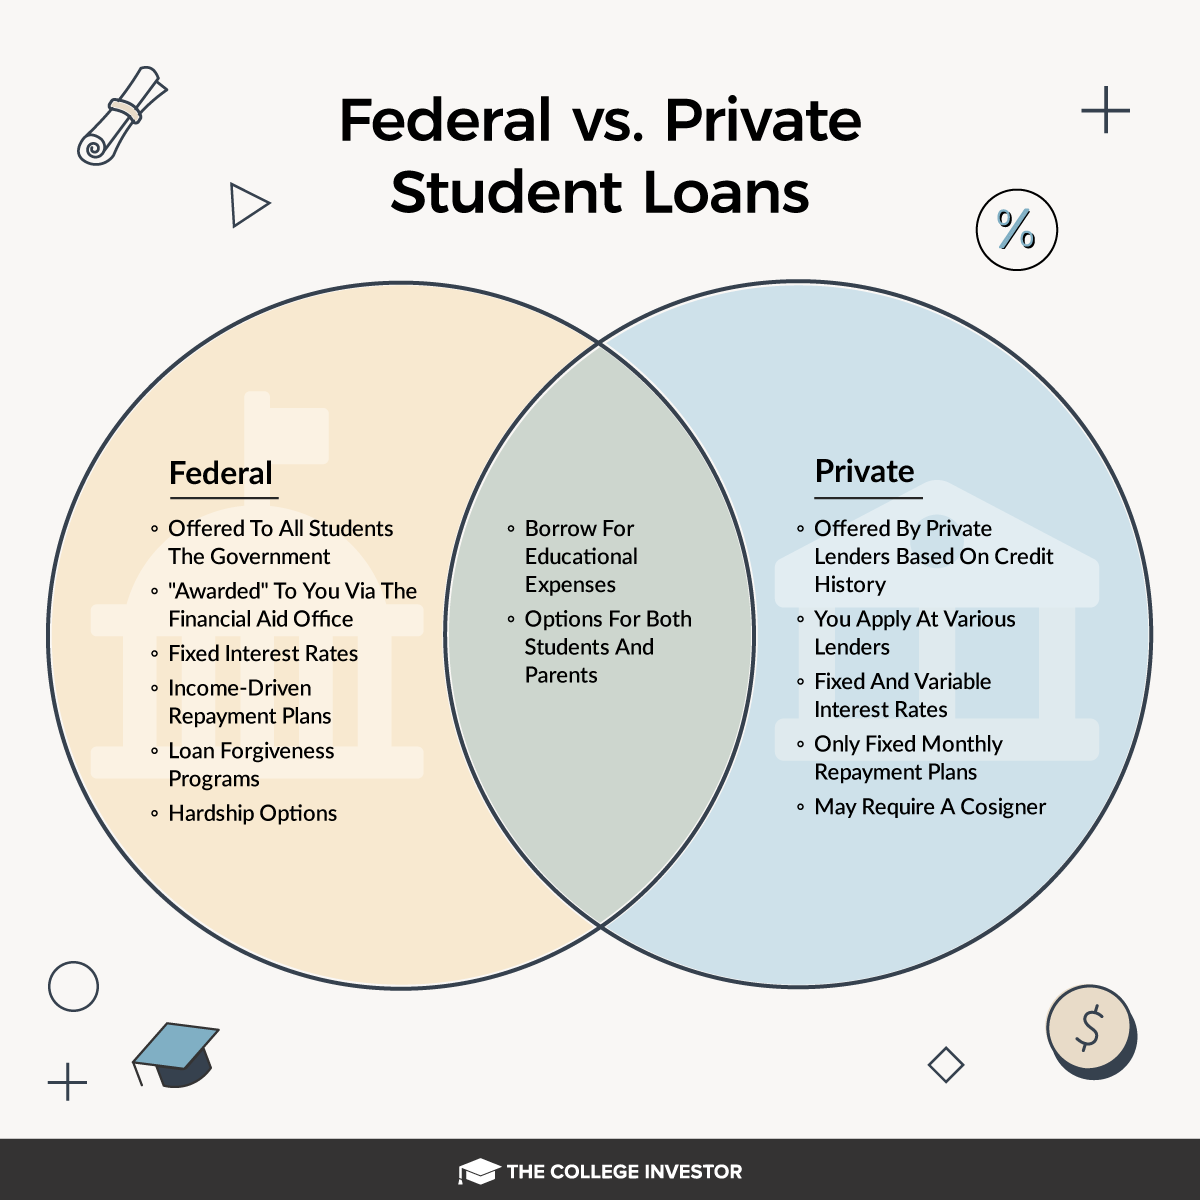 Federal vs. Private Student Loans Infographic